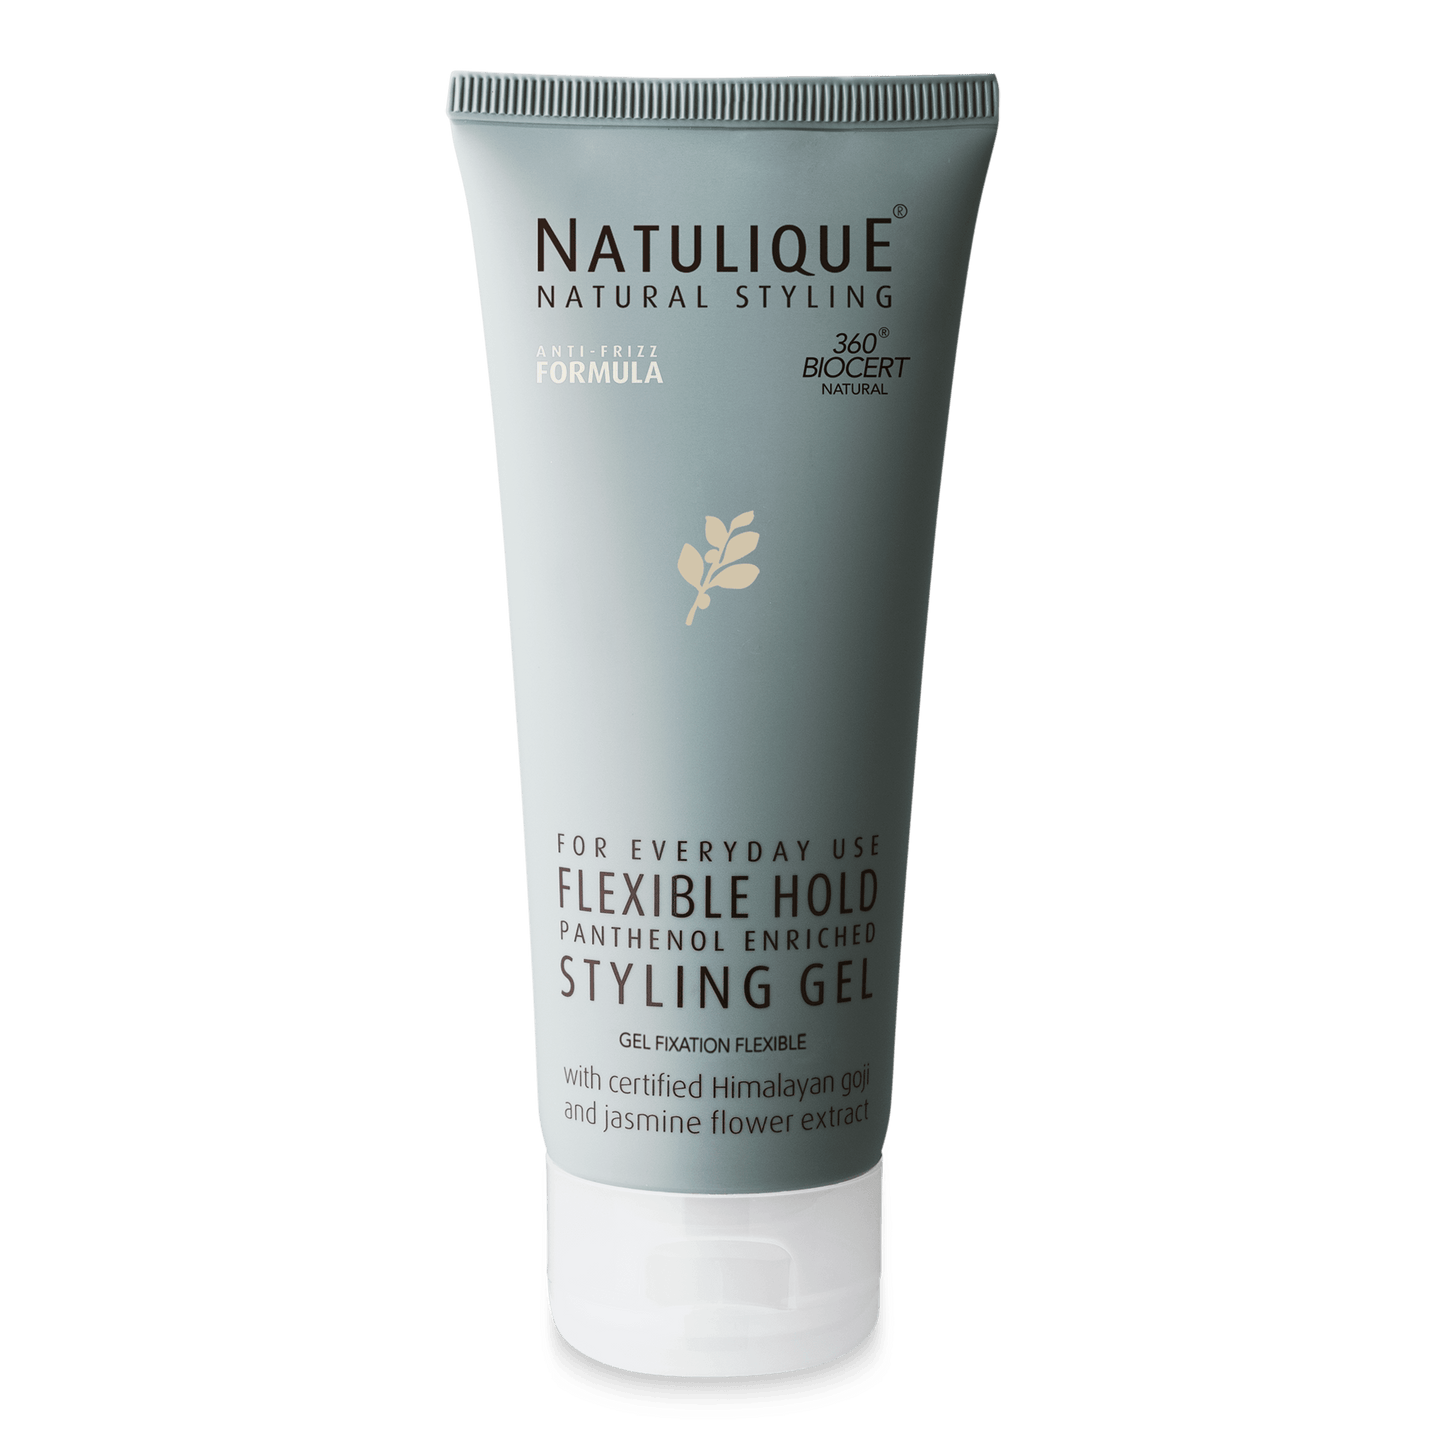 NATULIQUE Flexible Hold Styling Gel 100 ml - DAMICE Hair & Nails